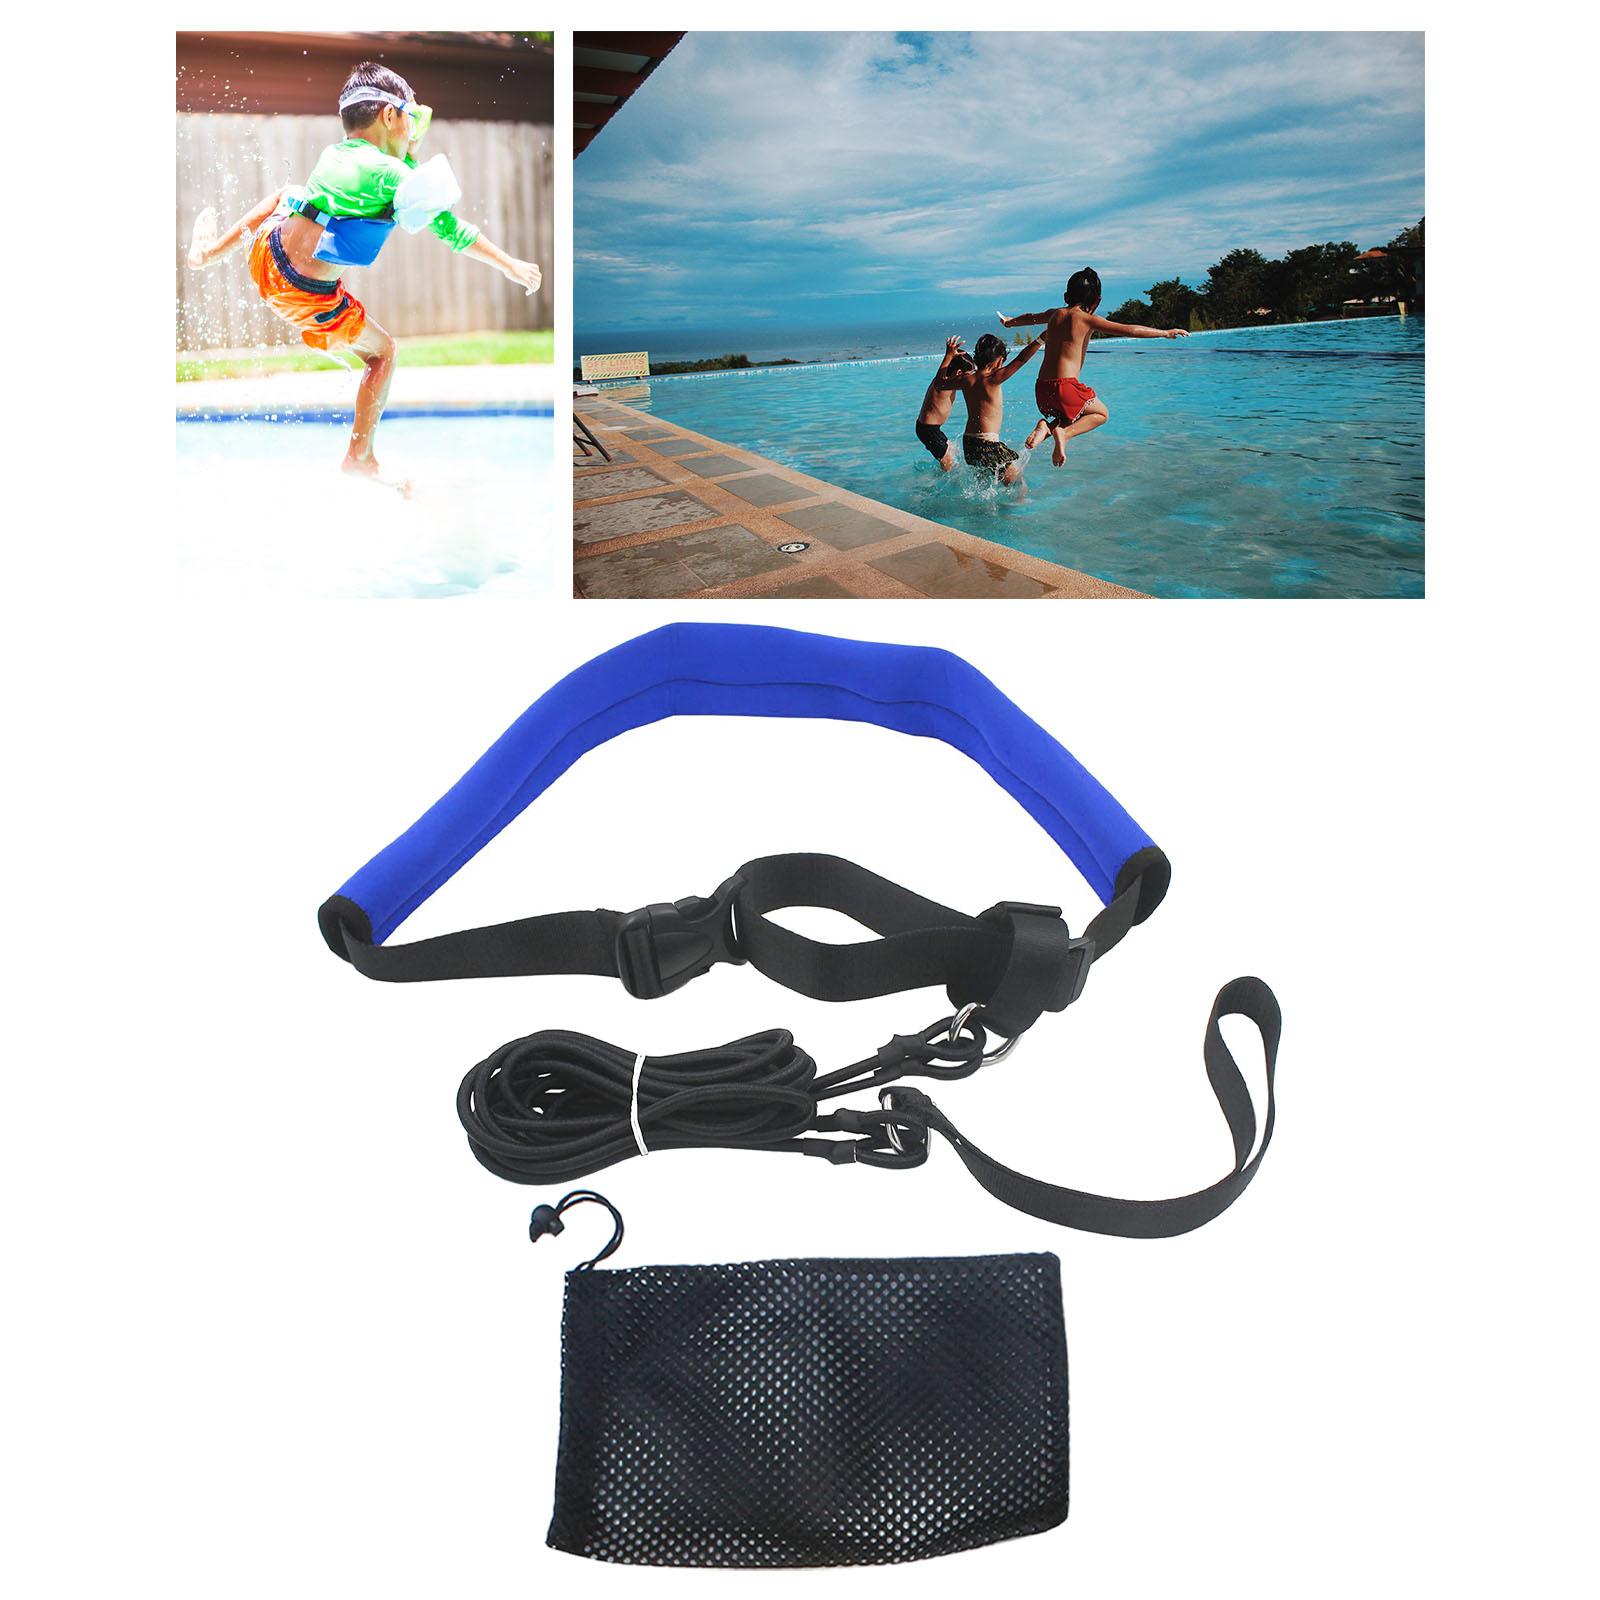 Swim Resistance Tether Stationary Swimming for Adults Professionals Athletes Blue